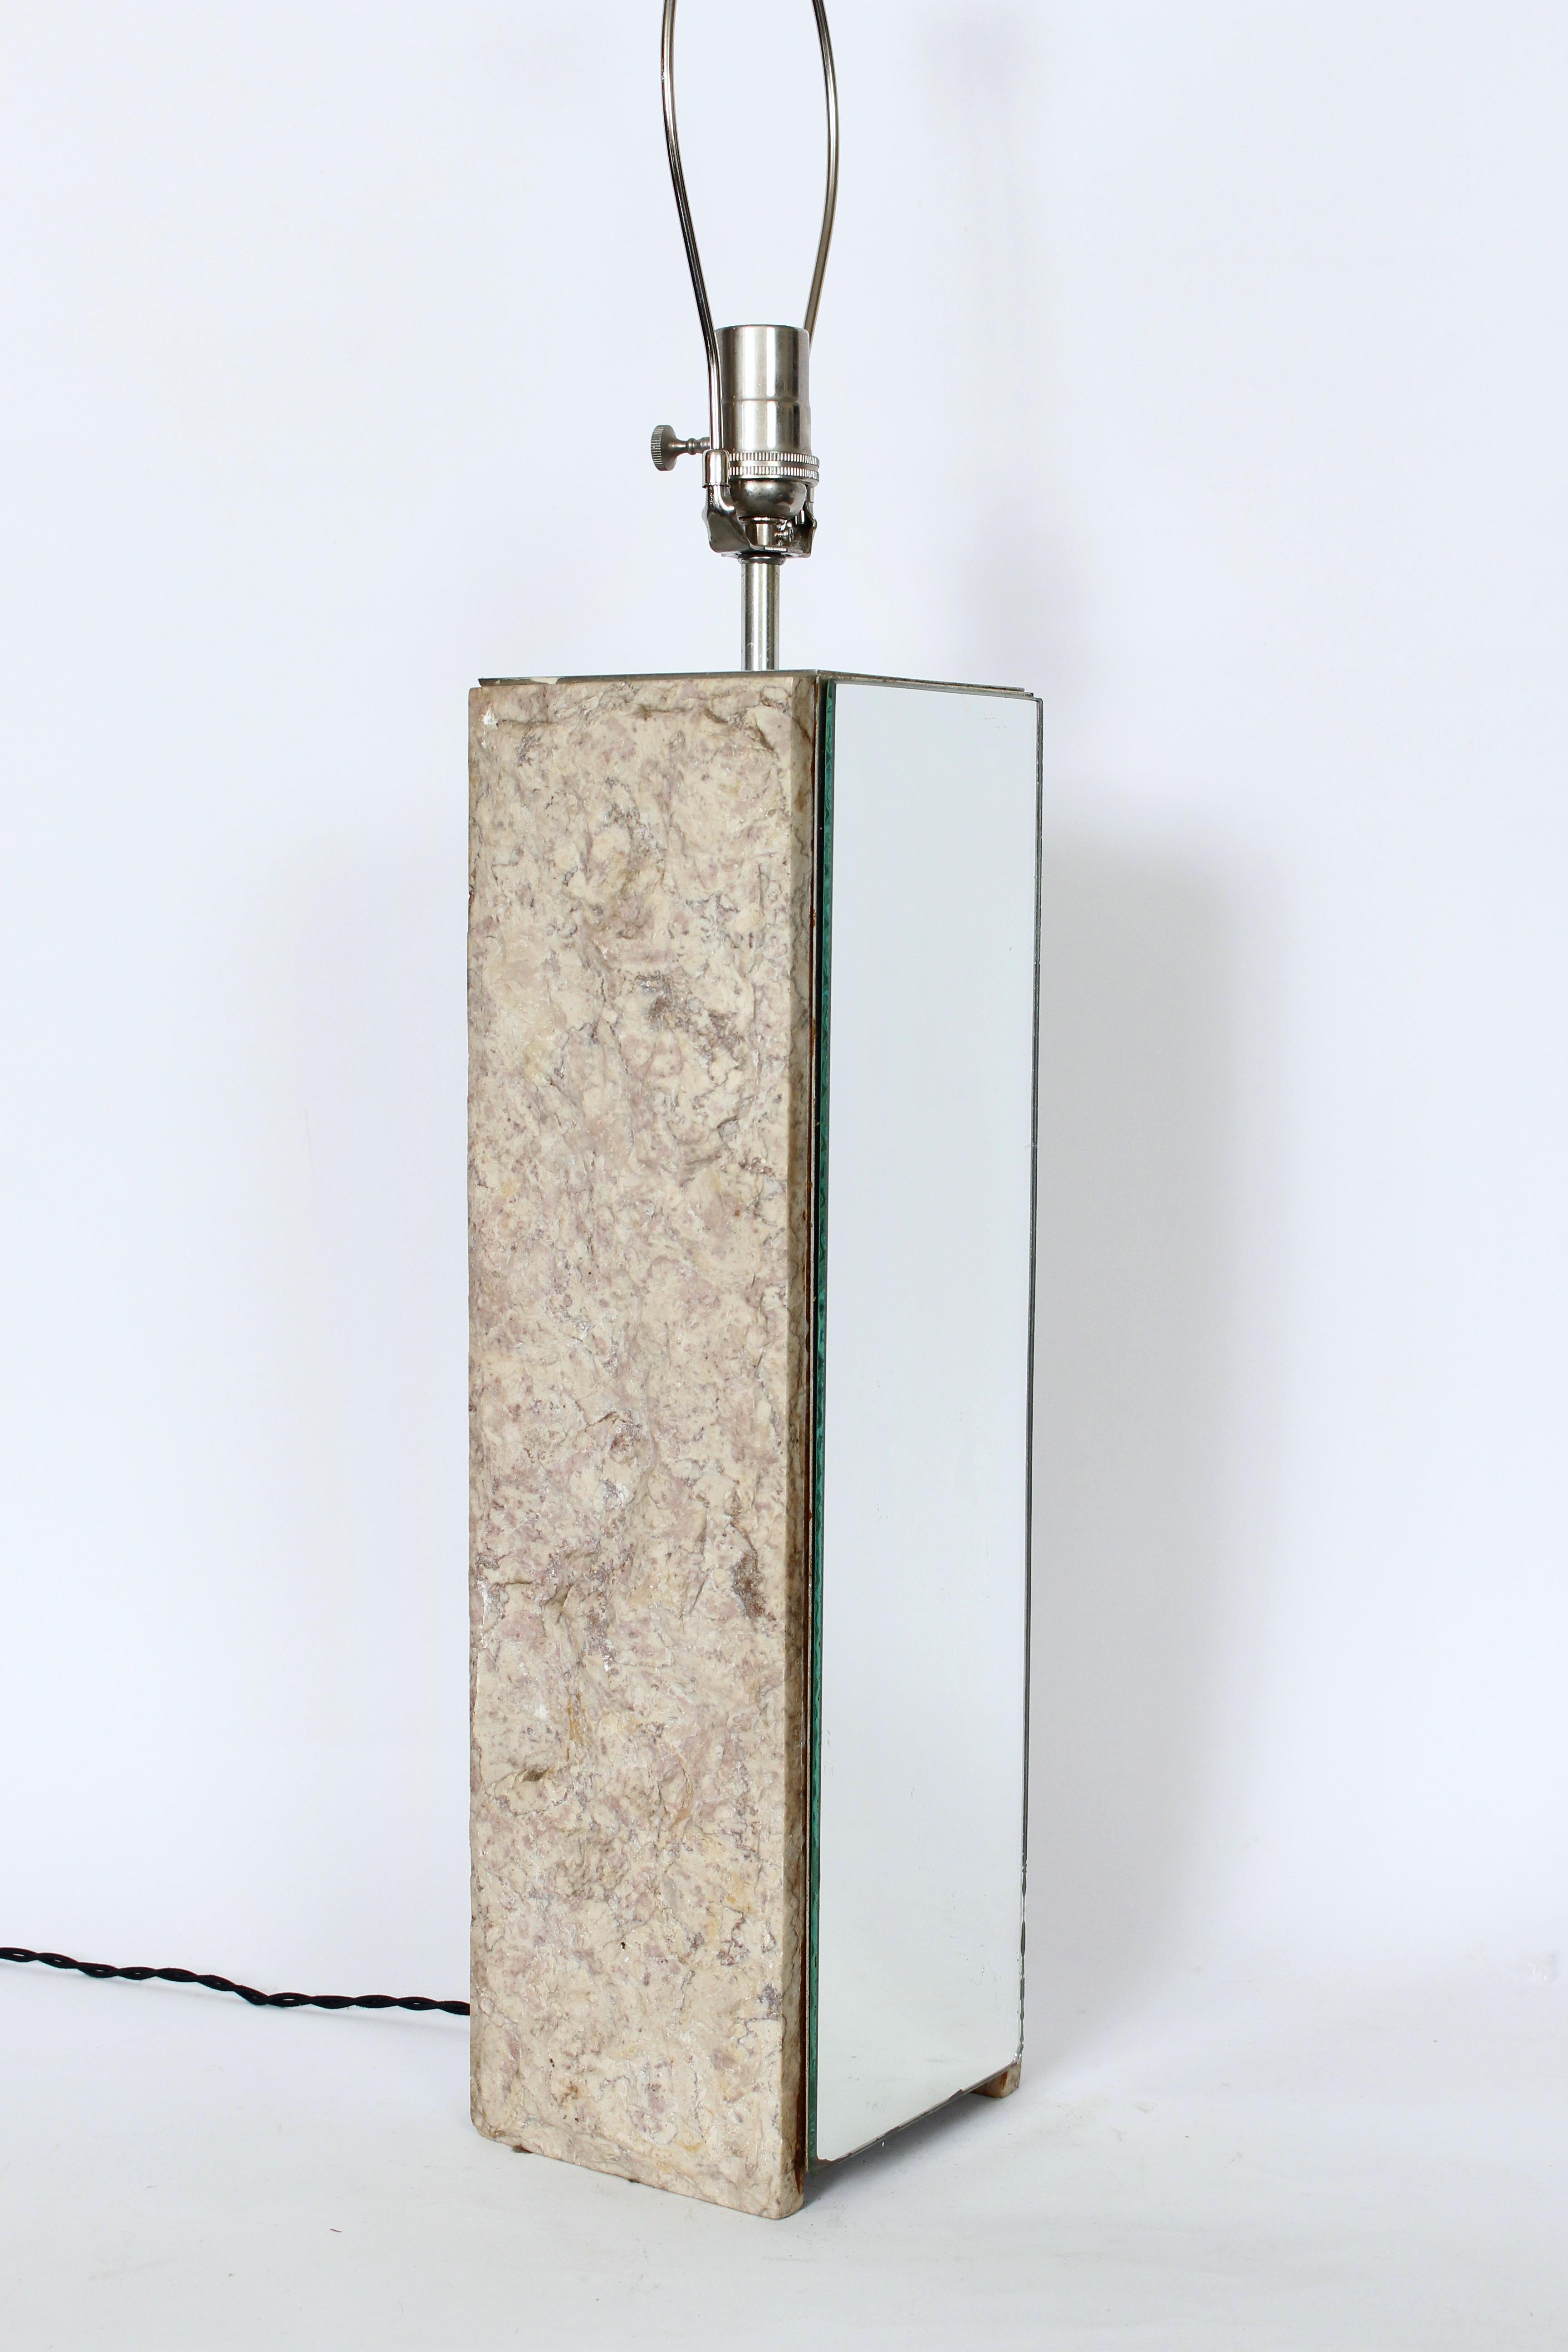 Substantial Laurel Lamp Co. Travertine and Mirror Table Lamp, 1960s For Sale 4